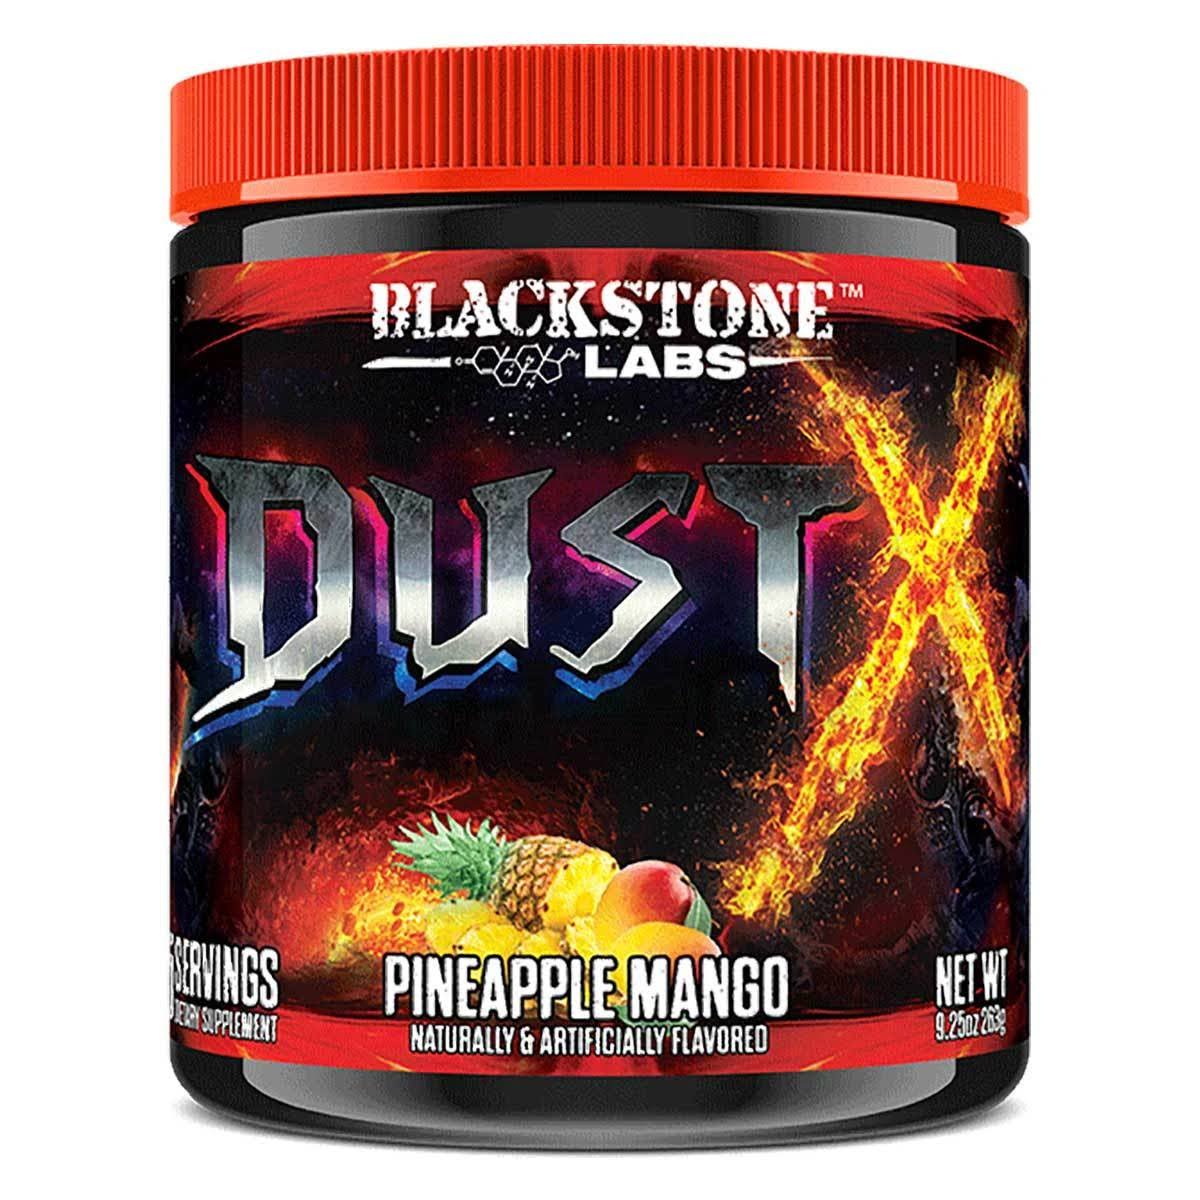 Blackstone Labs Dust Extreme Pre-Workout - Pineapple Mango, 30 Servings